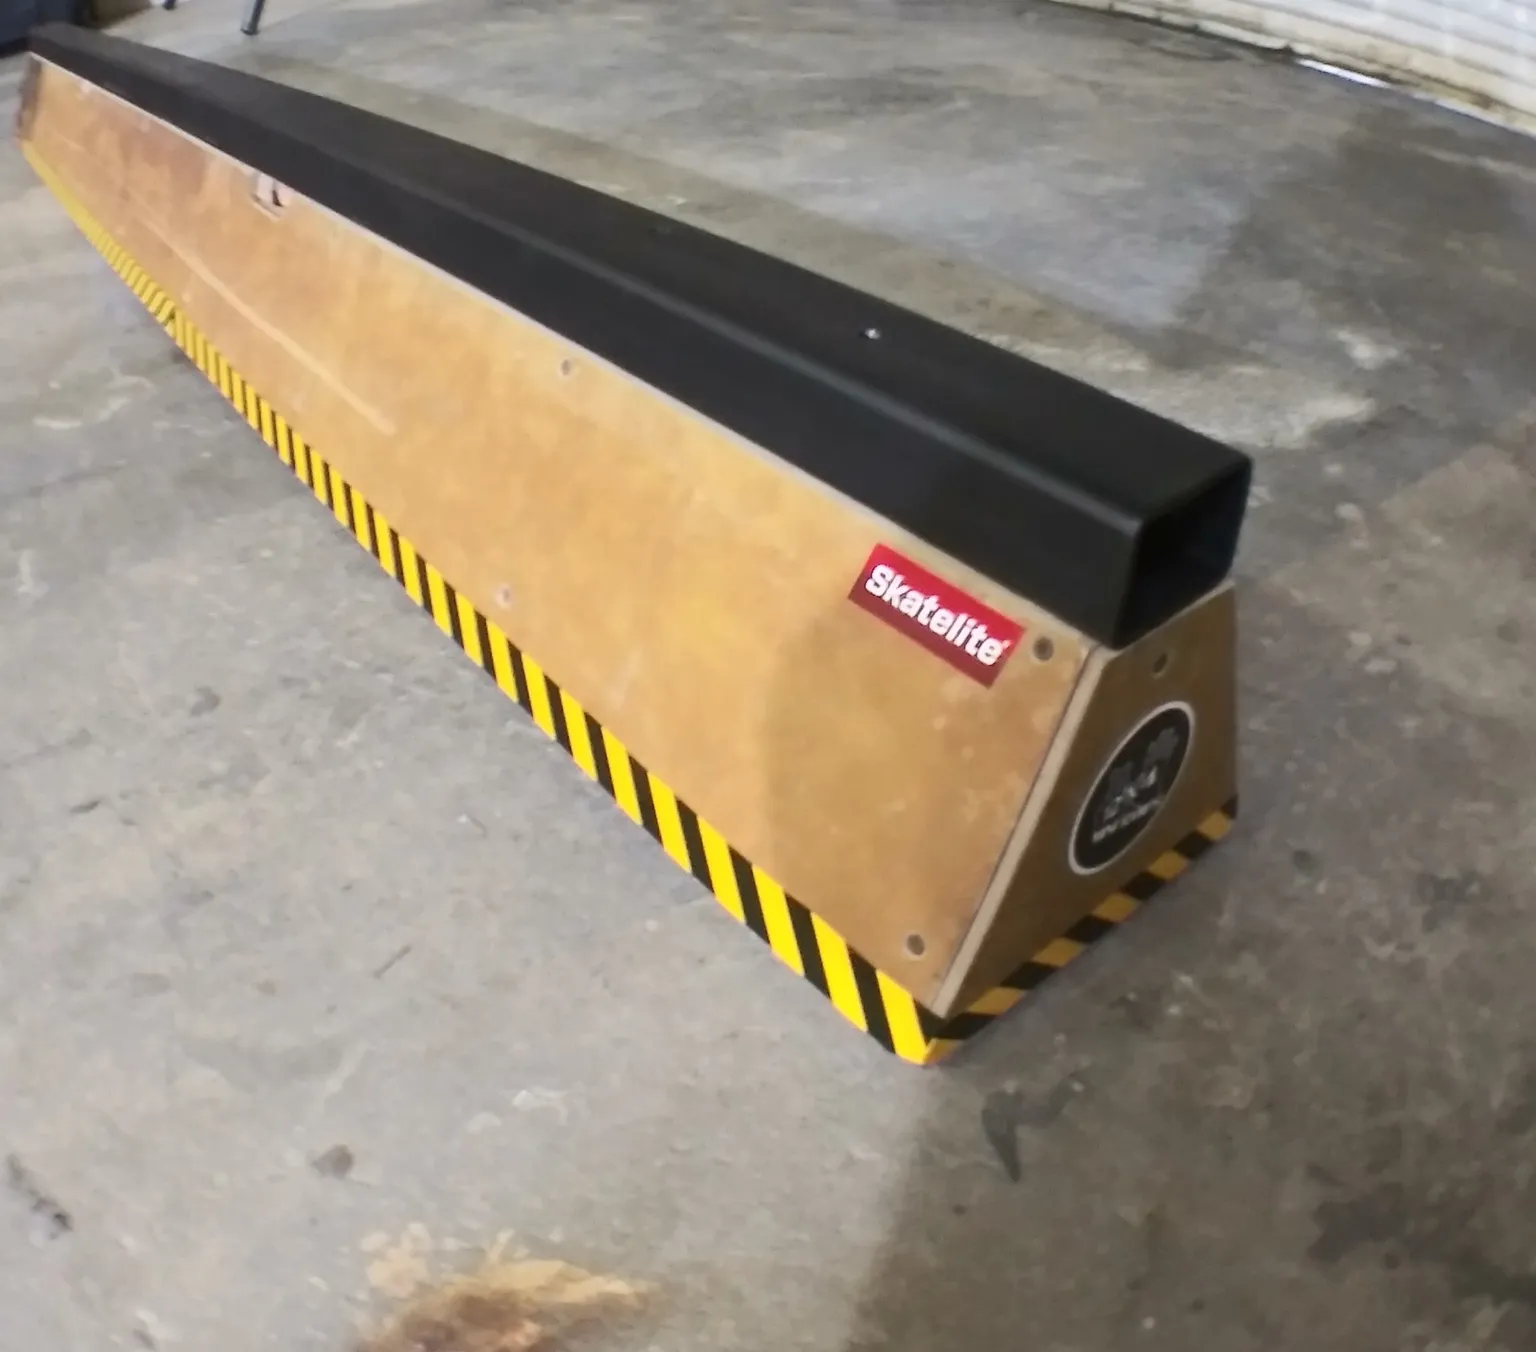 Eight foot long slappy flat bar sitting on concrete, side view